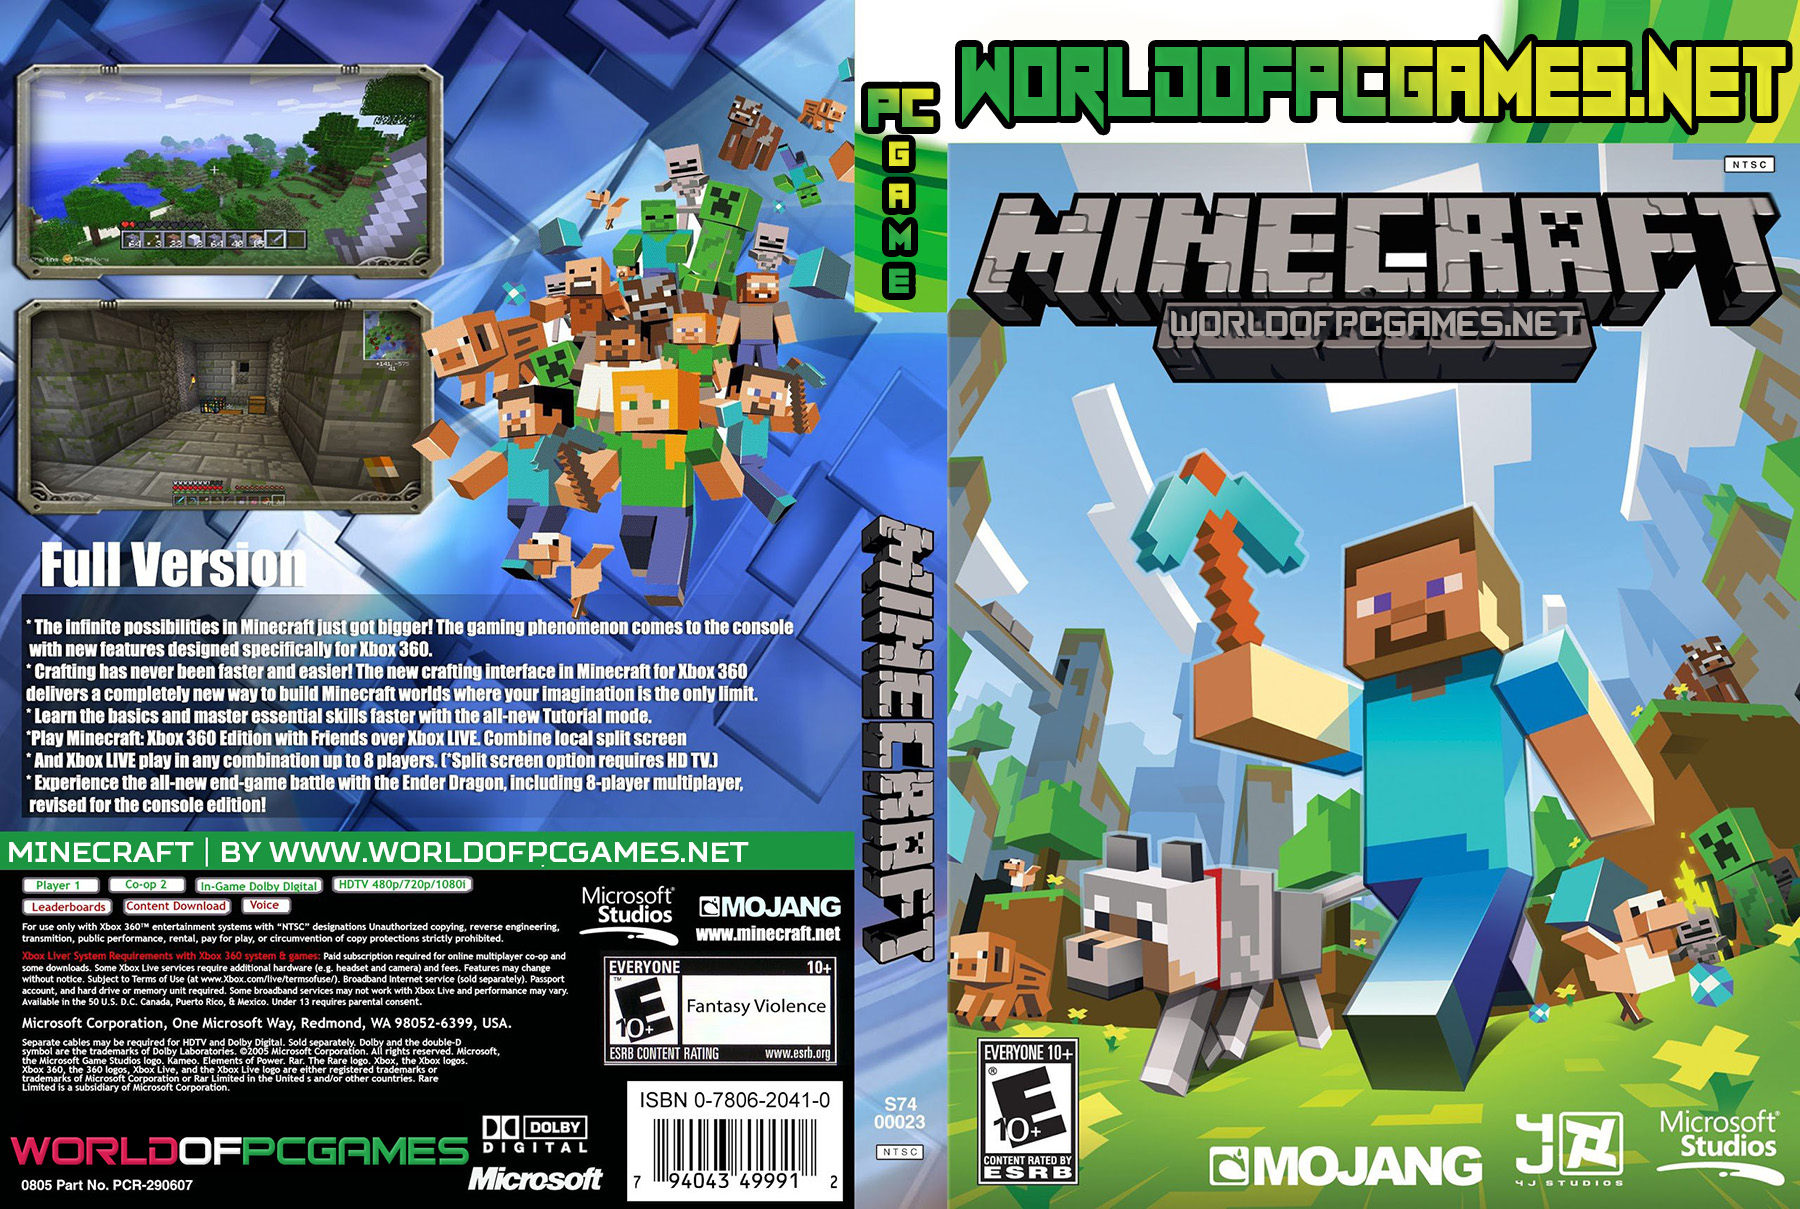 download minecraft 1.8 full version free for pc cracked